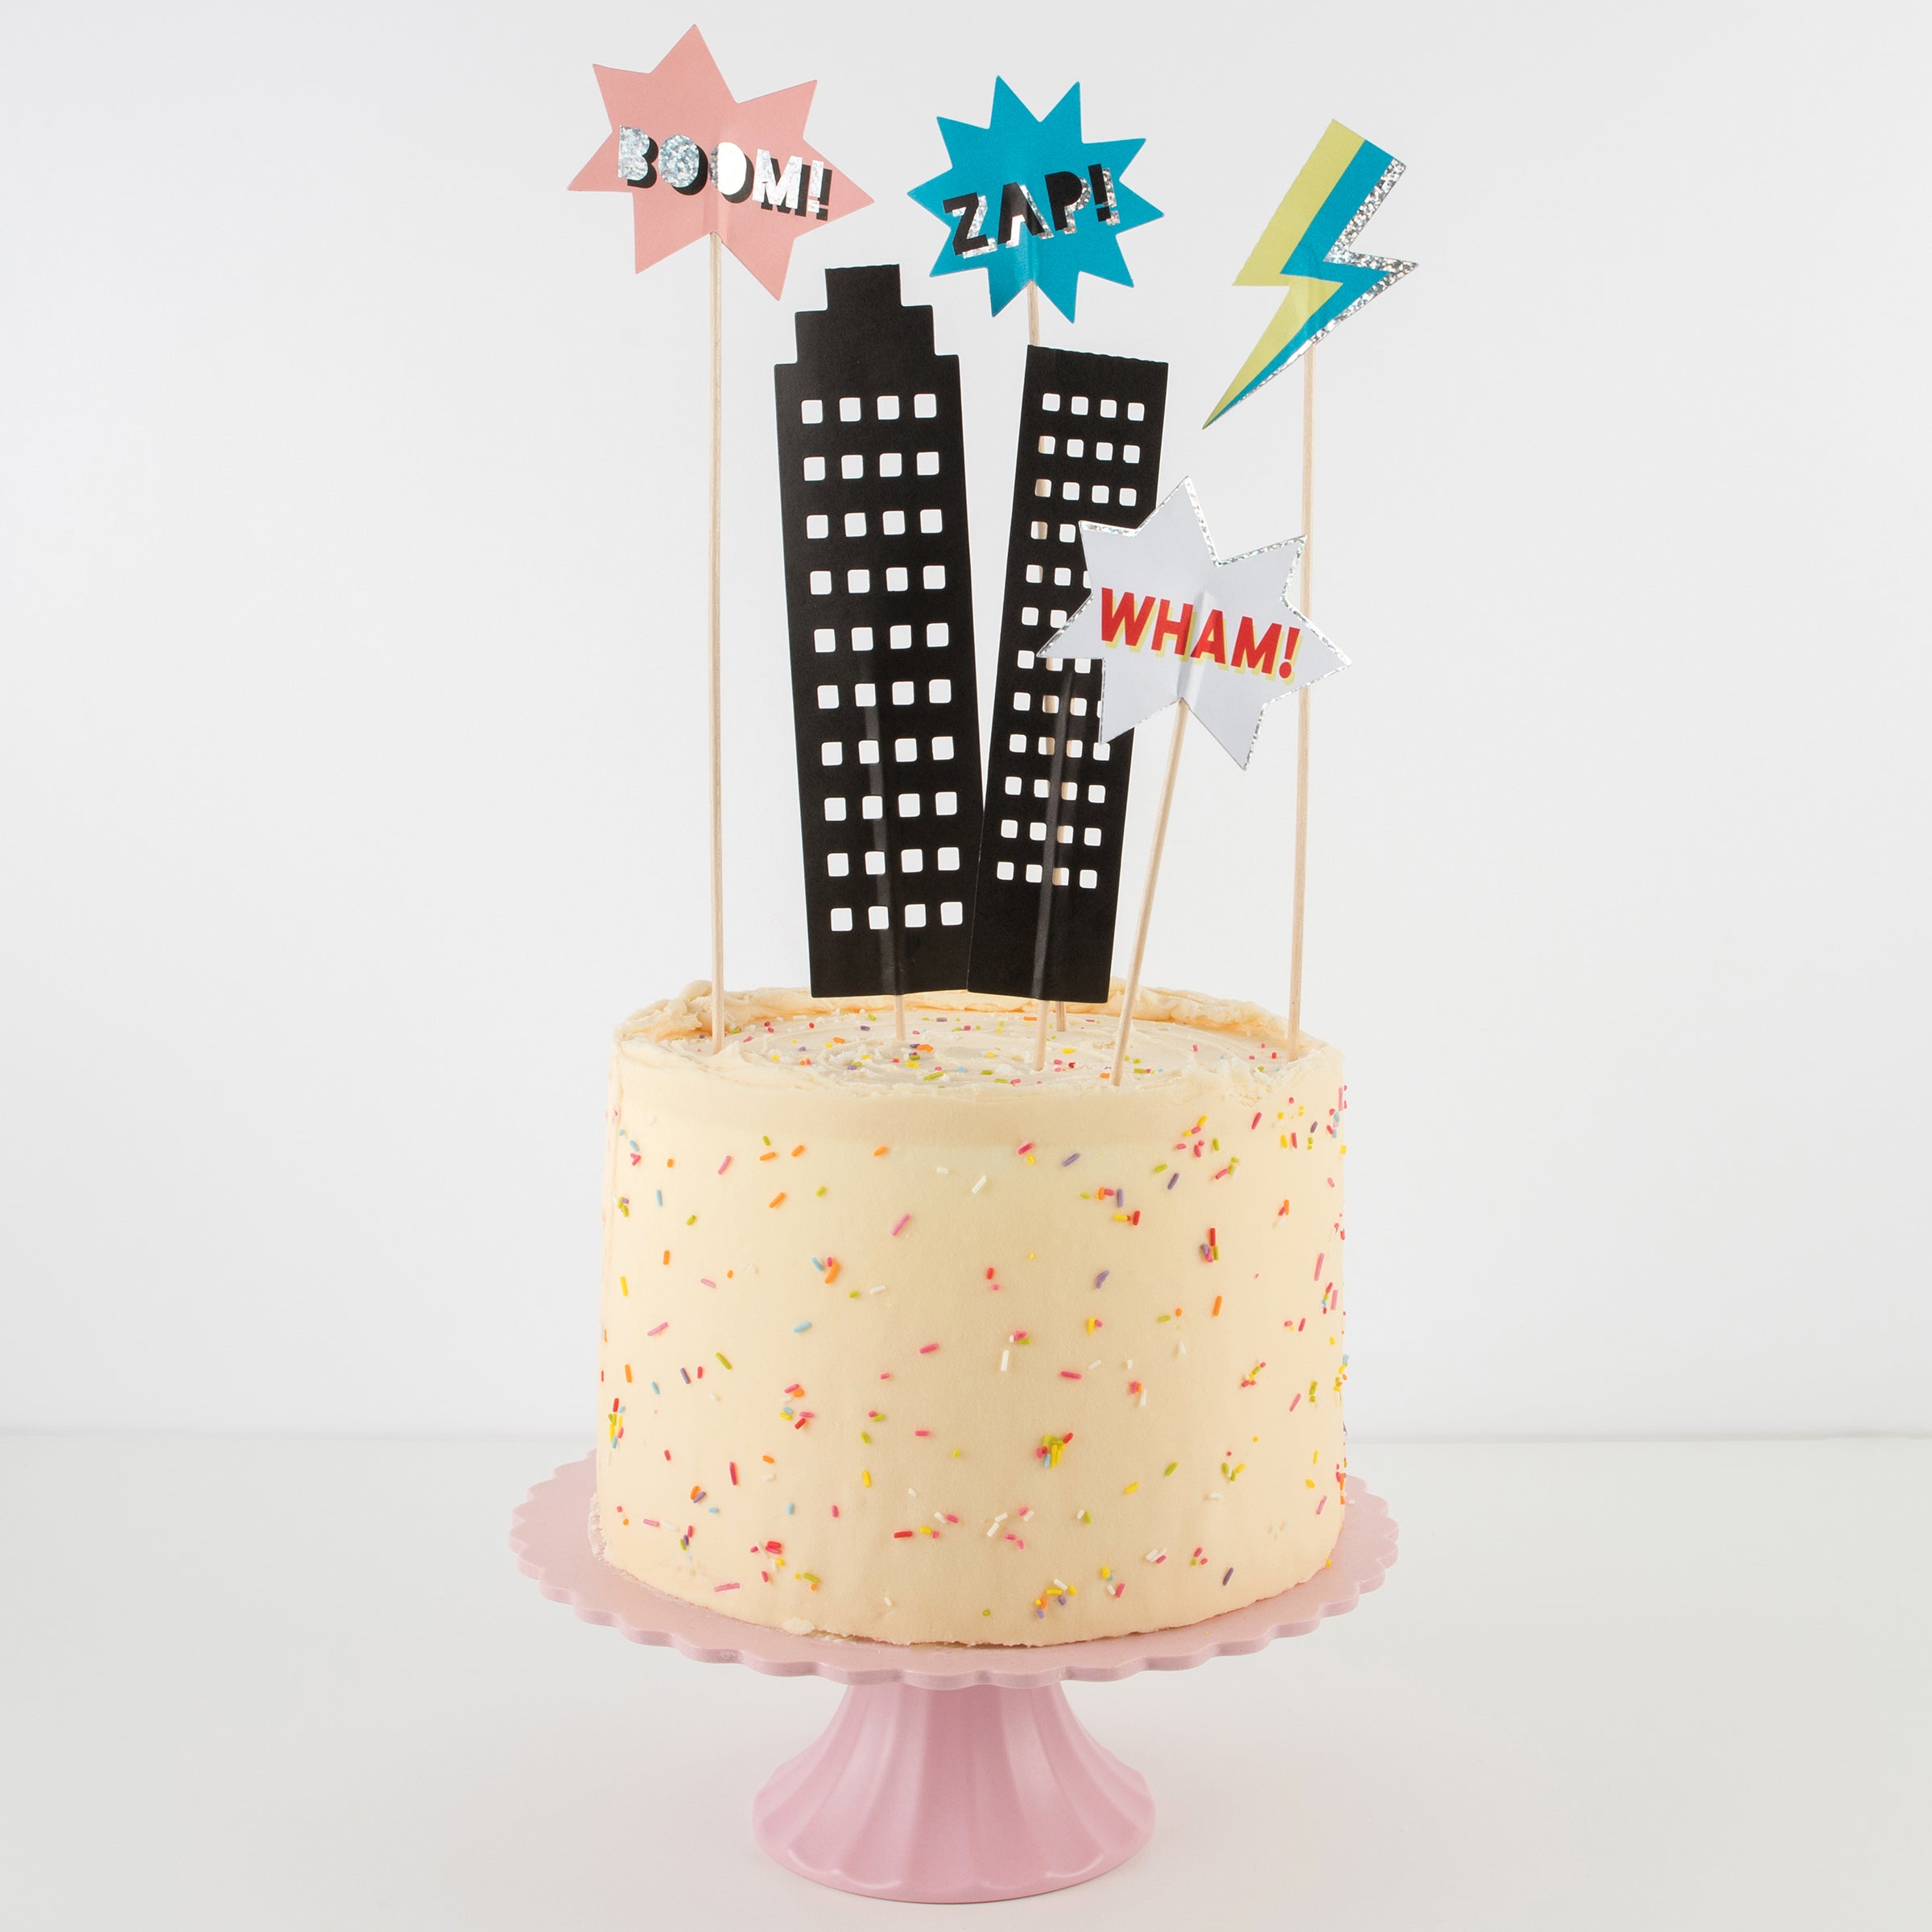 Our birthday cake toppers are perfect for a superhero birthday party.